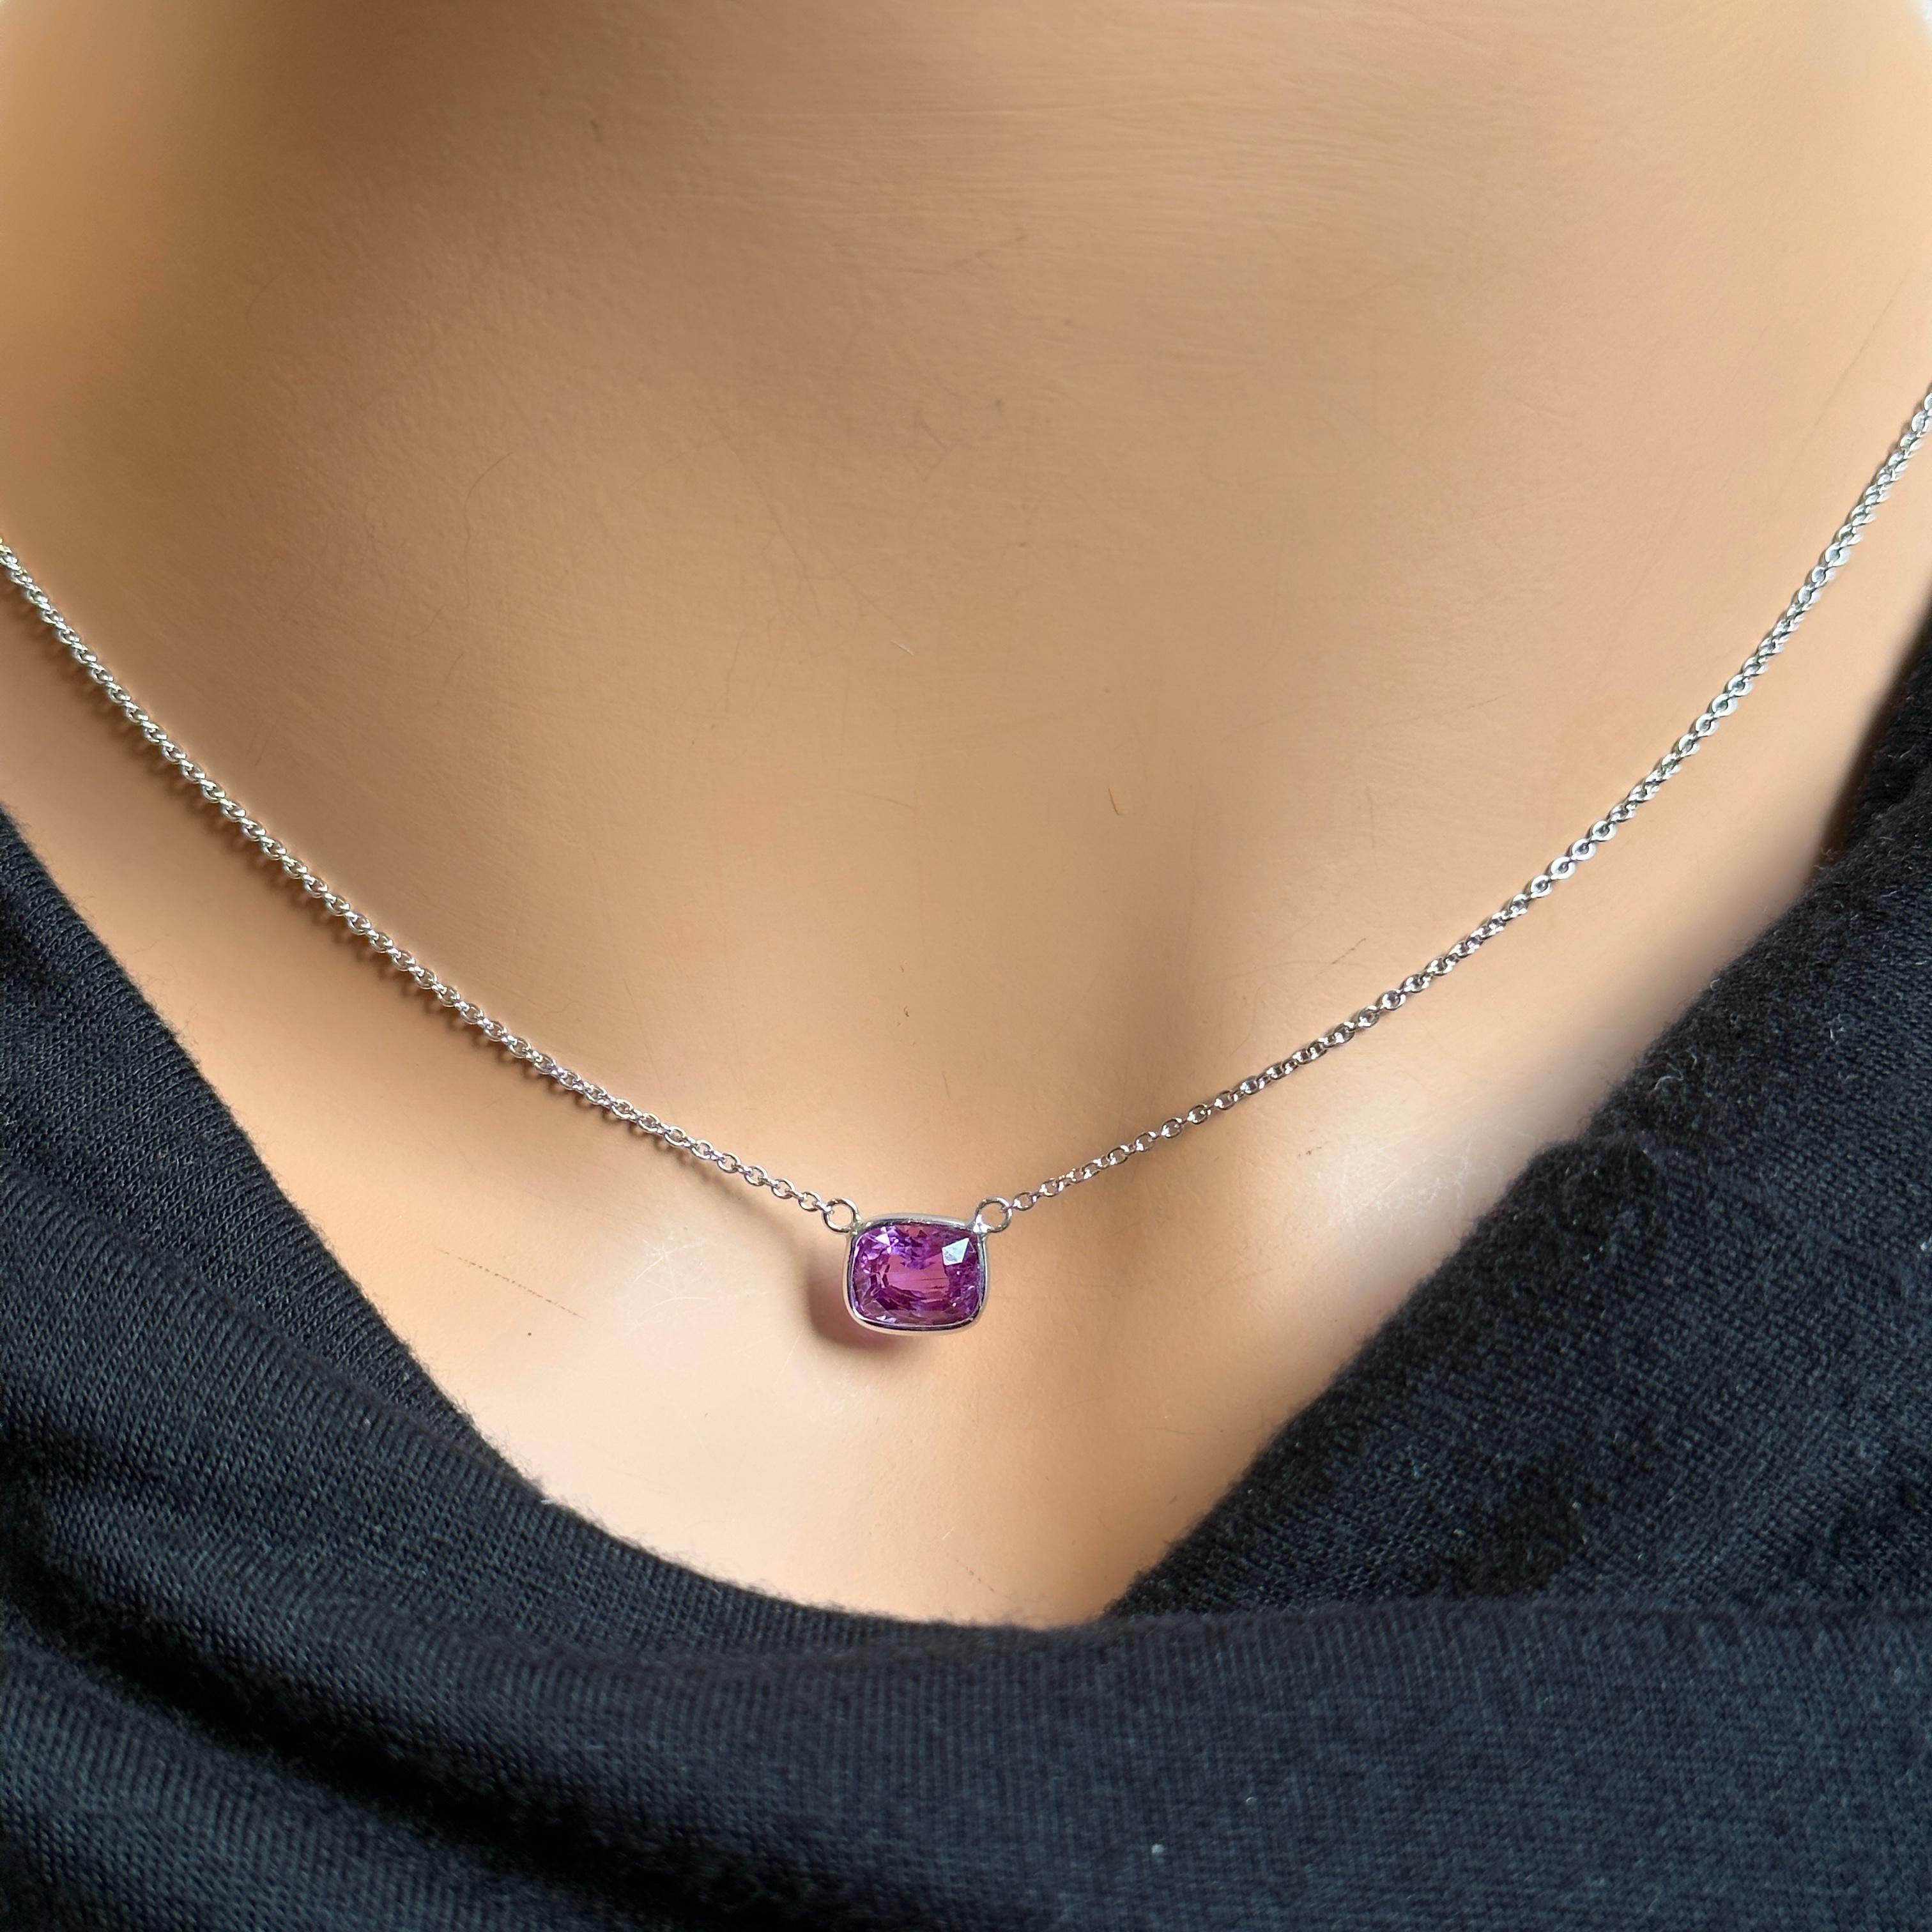 A fashion necklace made of 14k white gold with a main stone of a certified purple cushion-cut sapphire weighing 1.93 carats would be a stunning and luxurious choice. Purple sapphires are known for their rich and regal color, and the cushion cut adds